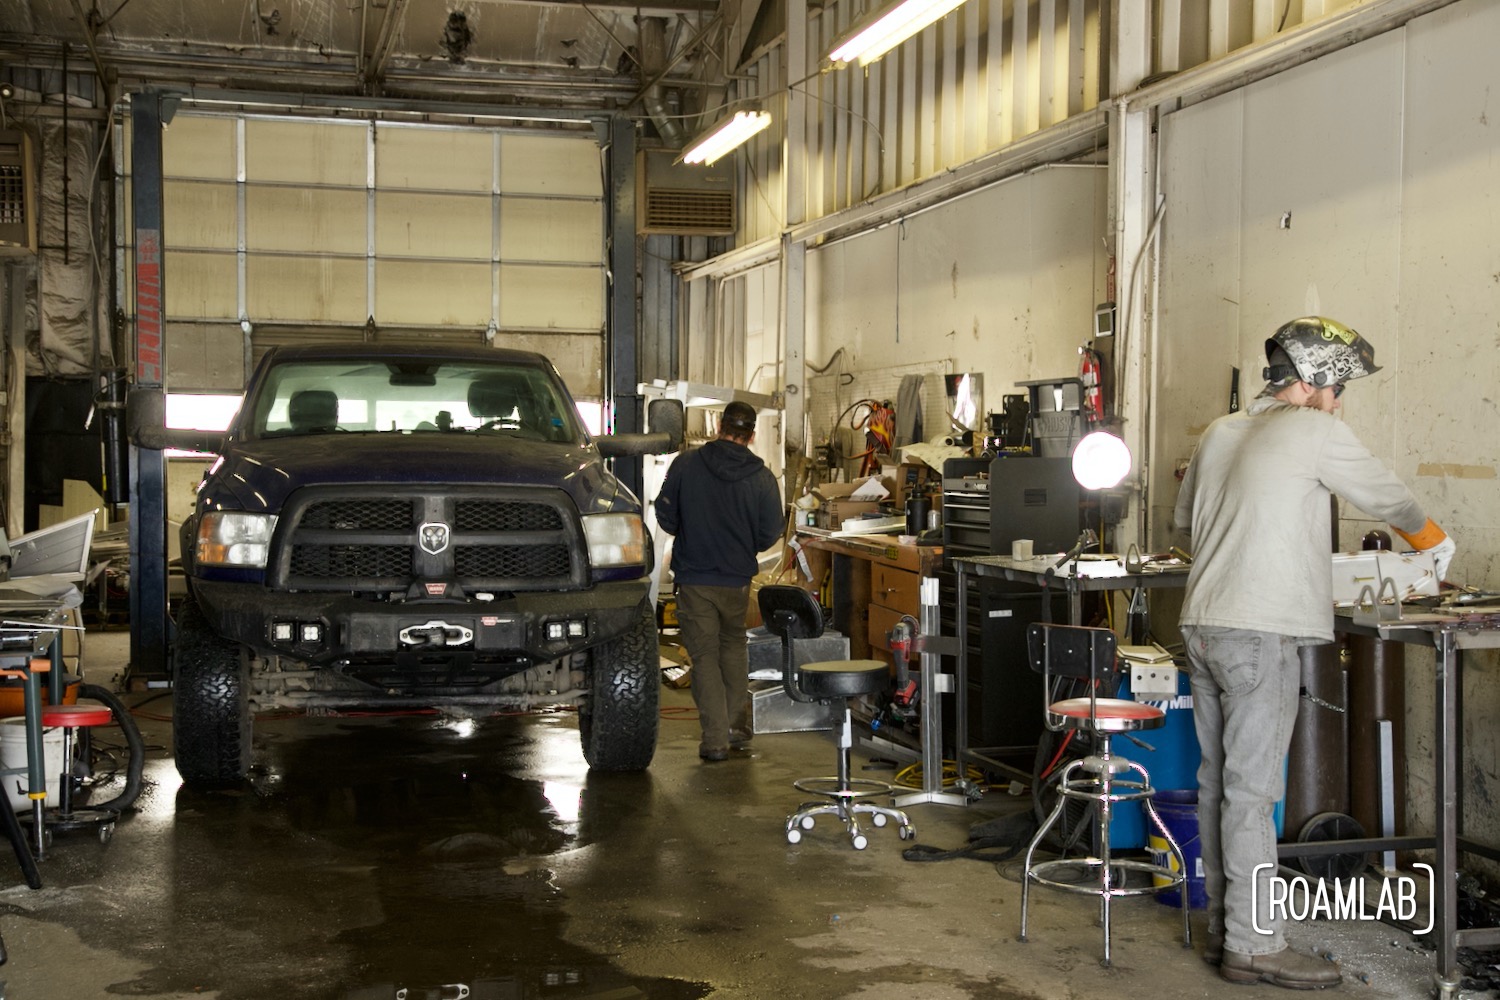 Man walking around truck parked in an industrial garage while other man standing at desk with welding helmet.